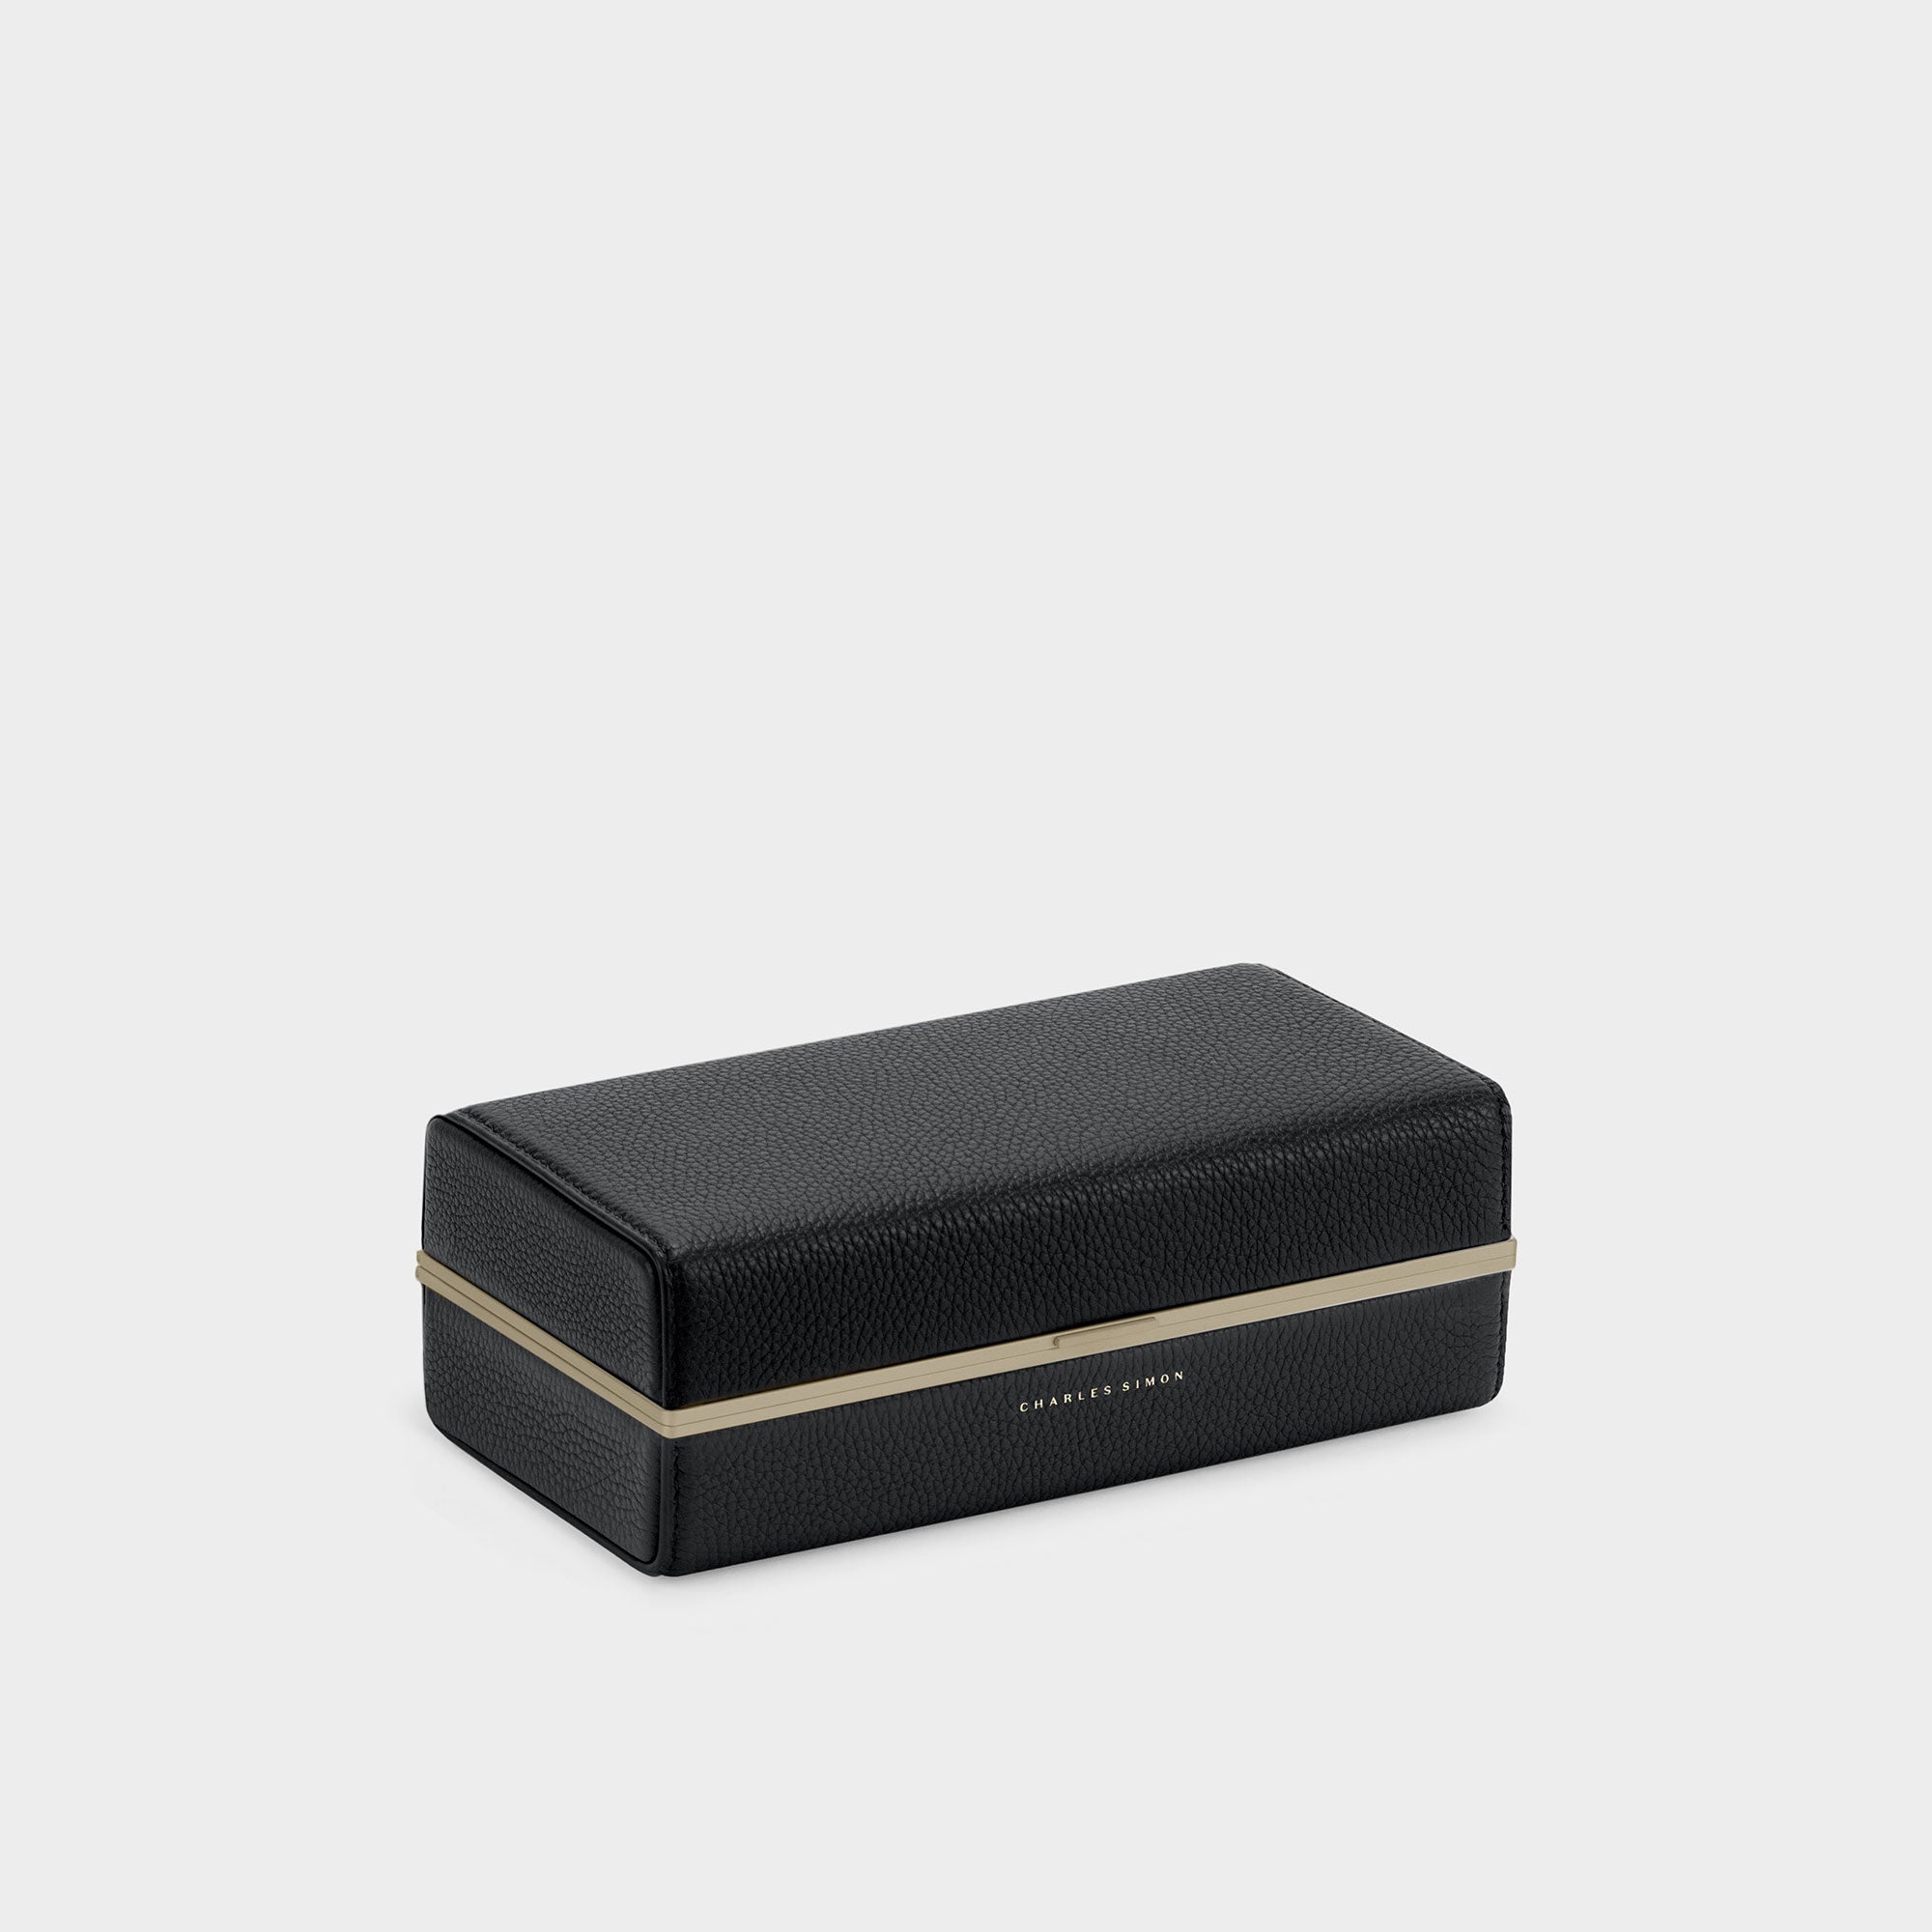 Product photo of closed black and gold luxury toiletry bag by Charles Simon